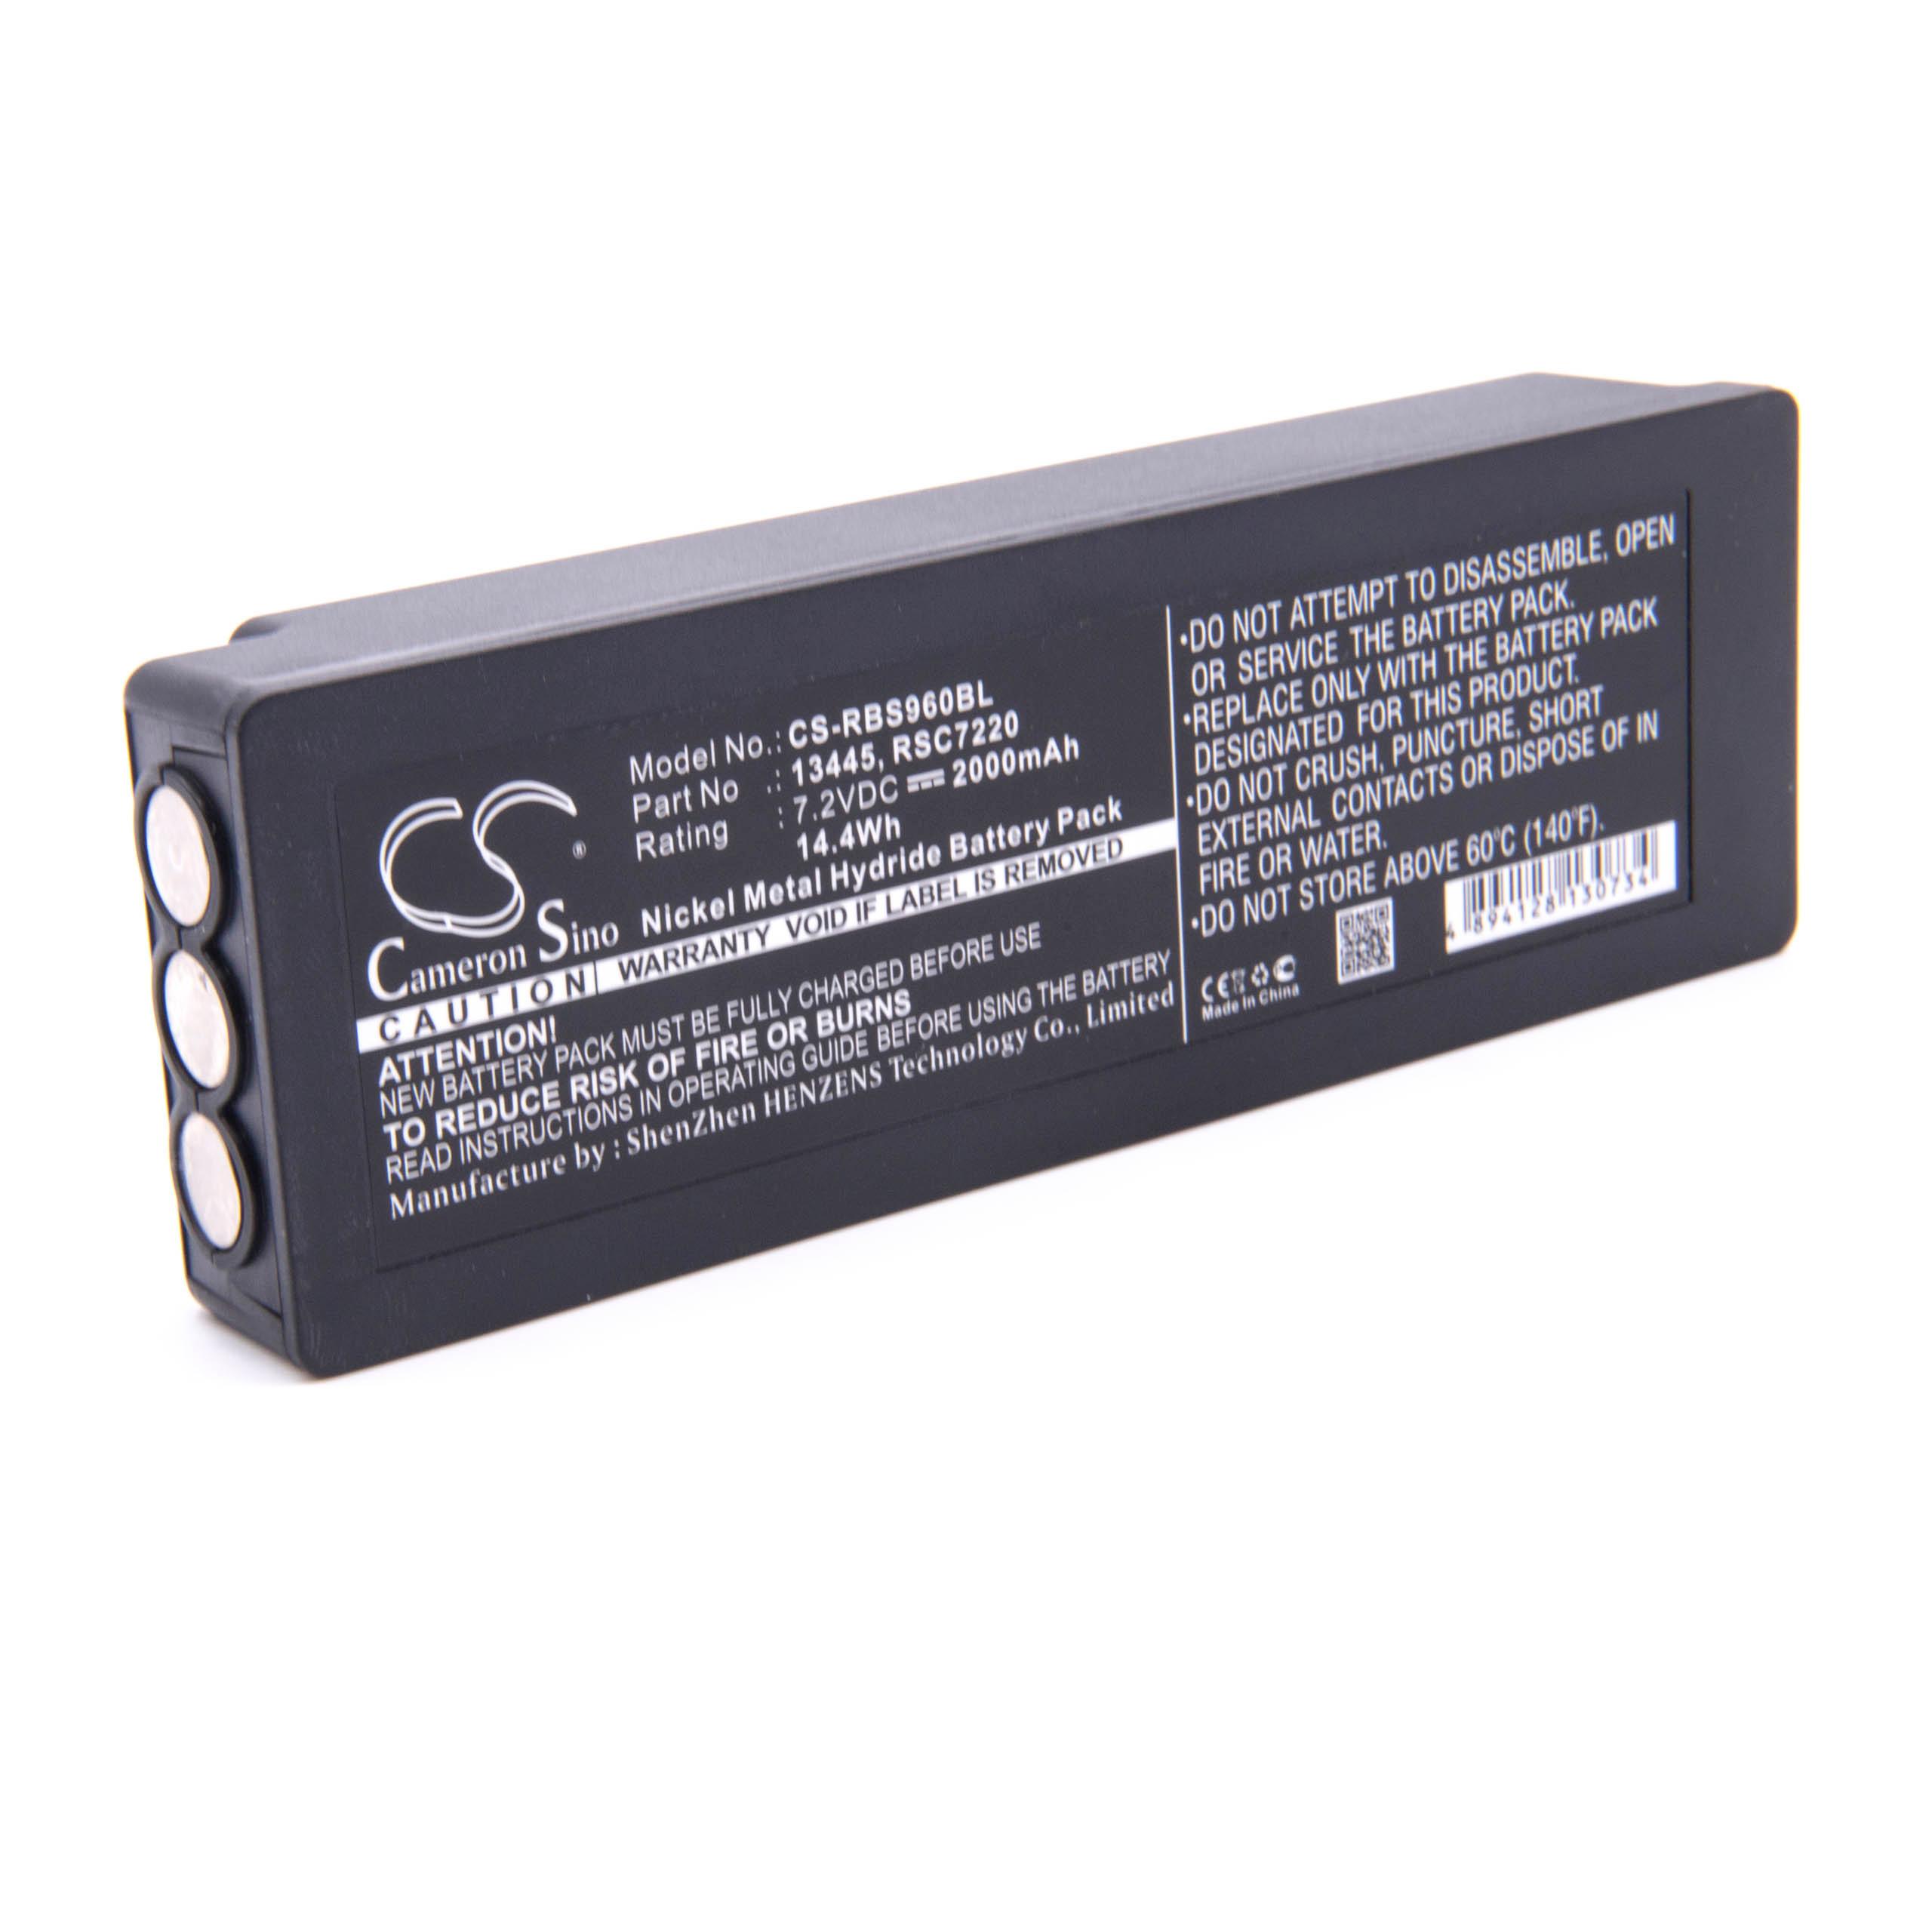 Industrial Remote Control Battery Replacement for Palfinger Scanreco 1026, 16131, 13445 - 2000mAh 7.2V NiMH